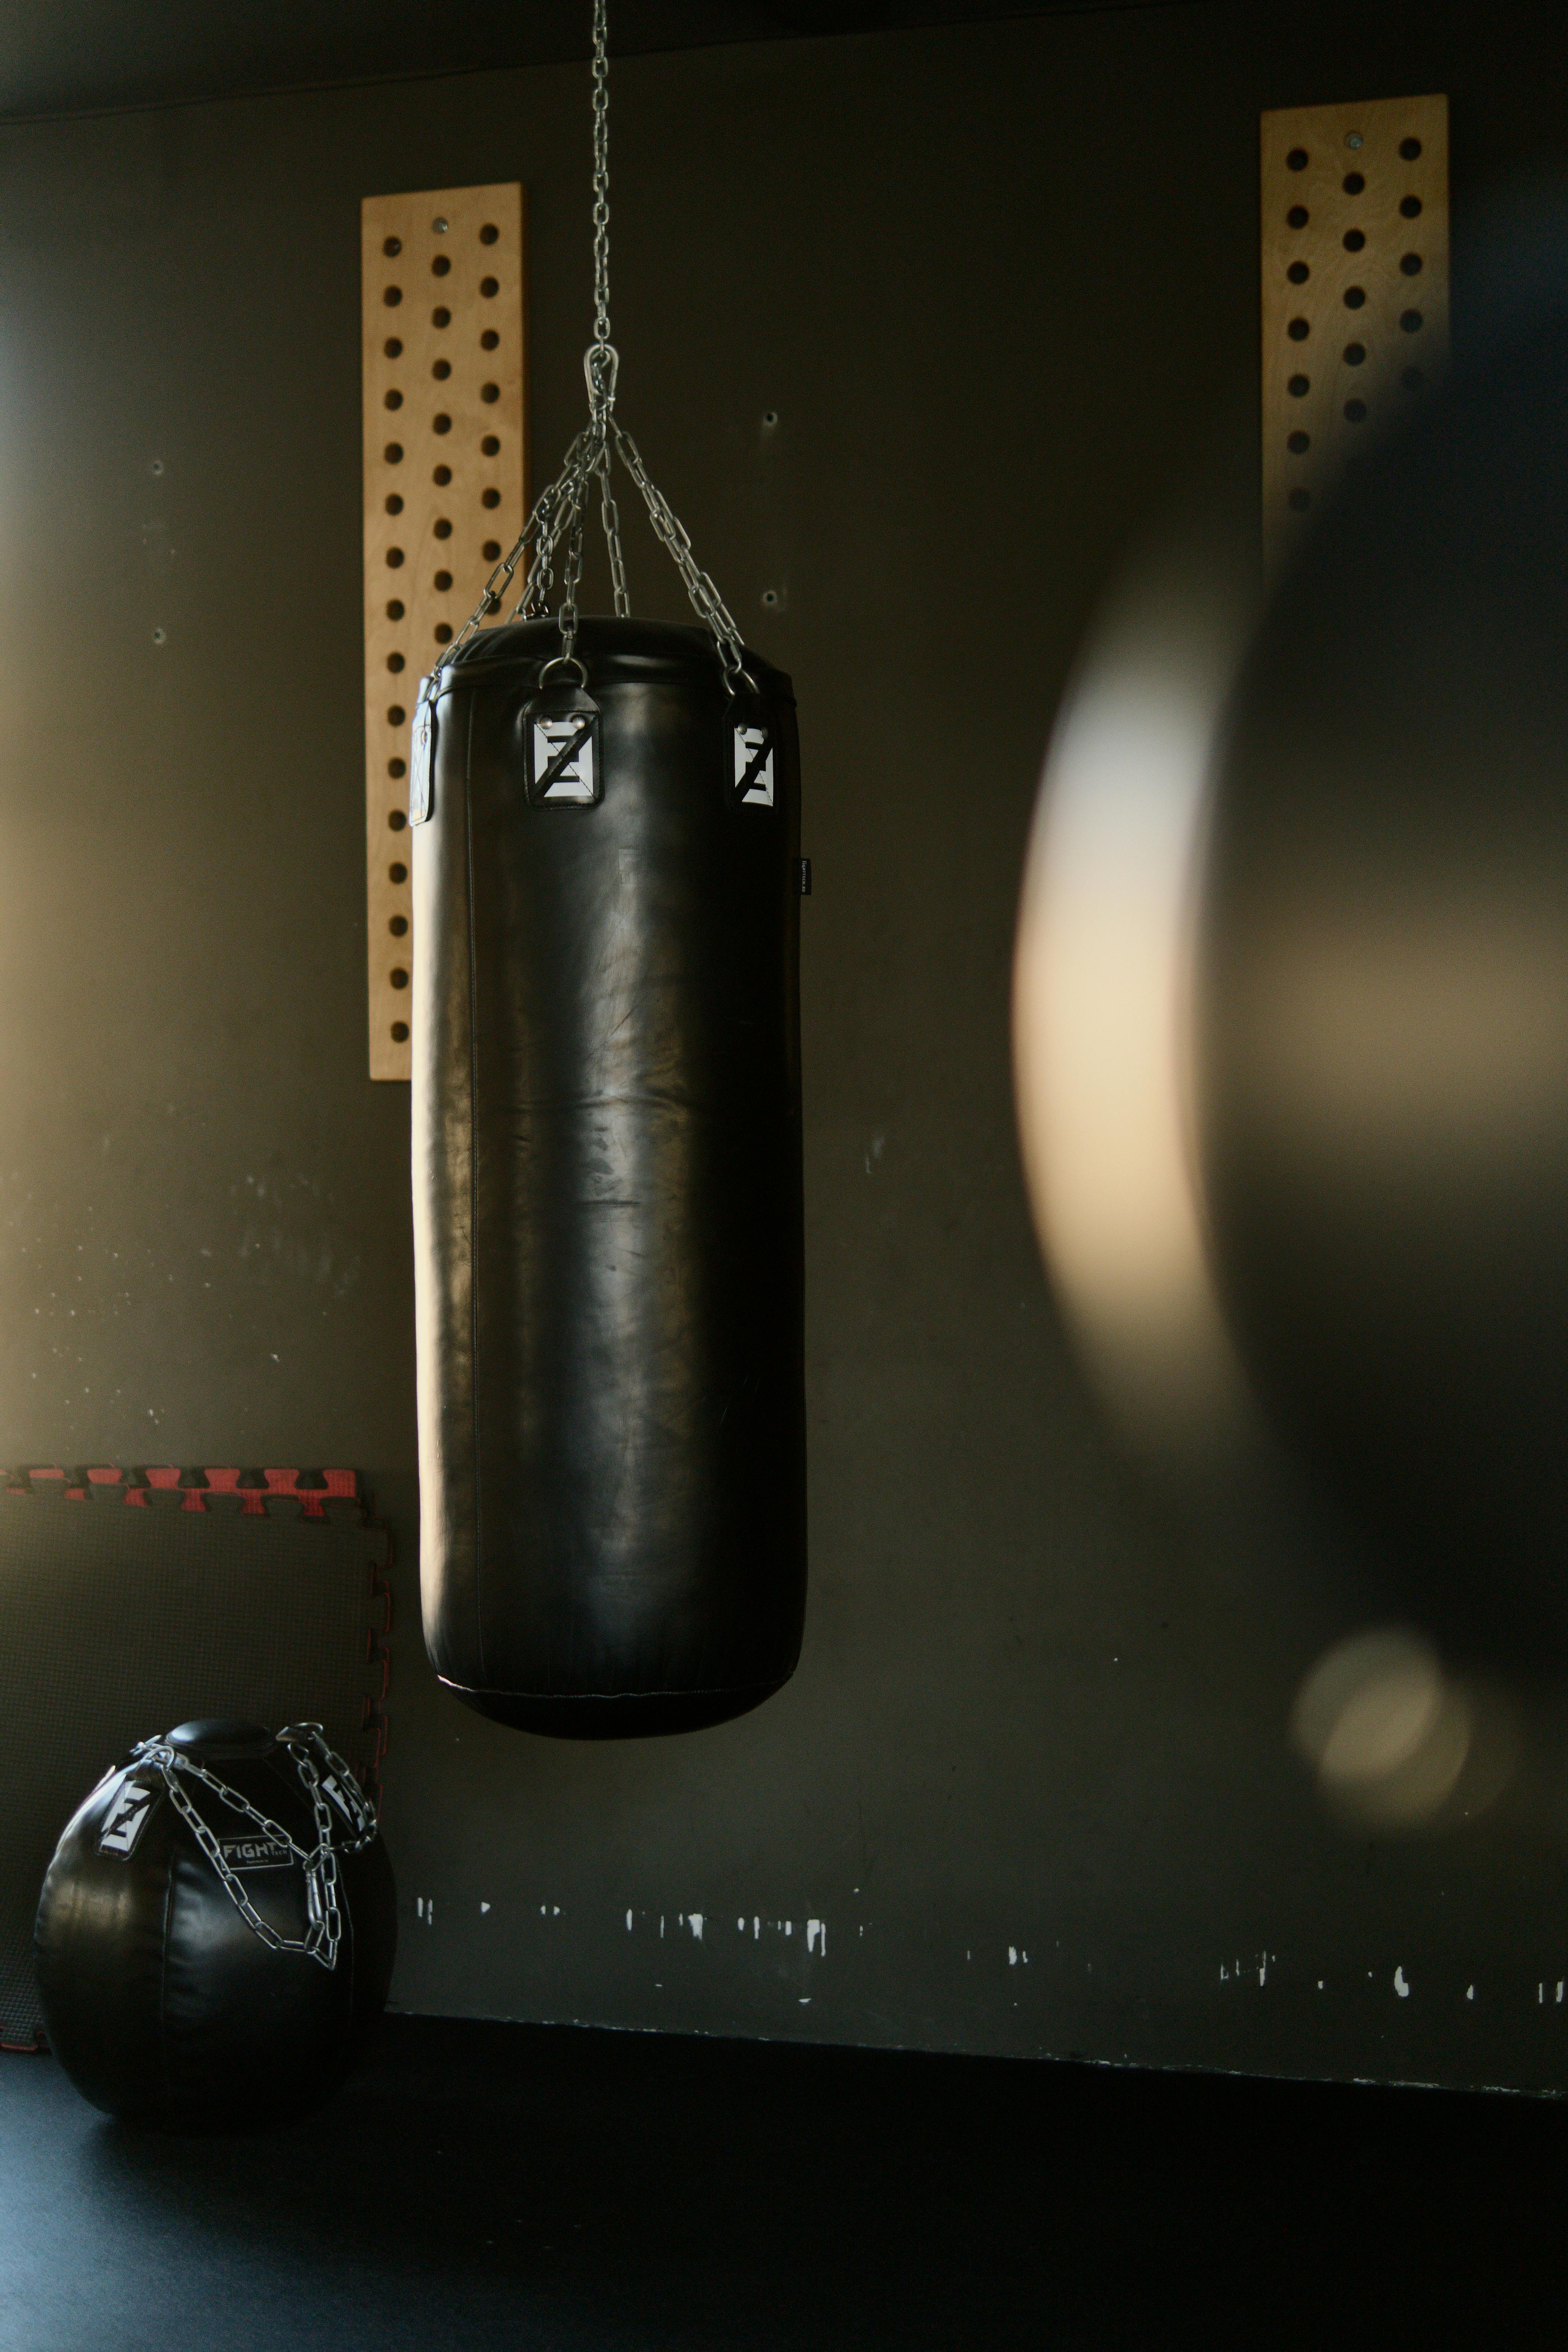 Can I Get a Fist Bump? 14 Best Punching Bags